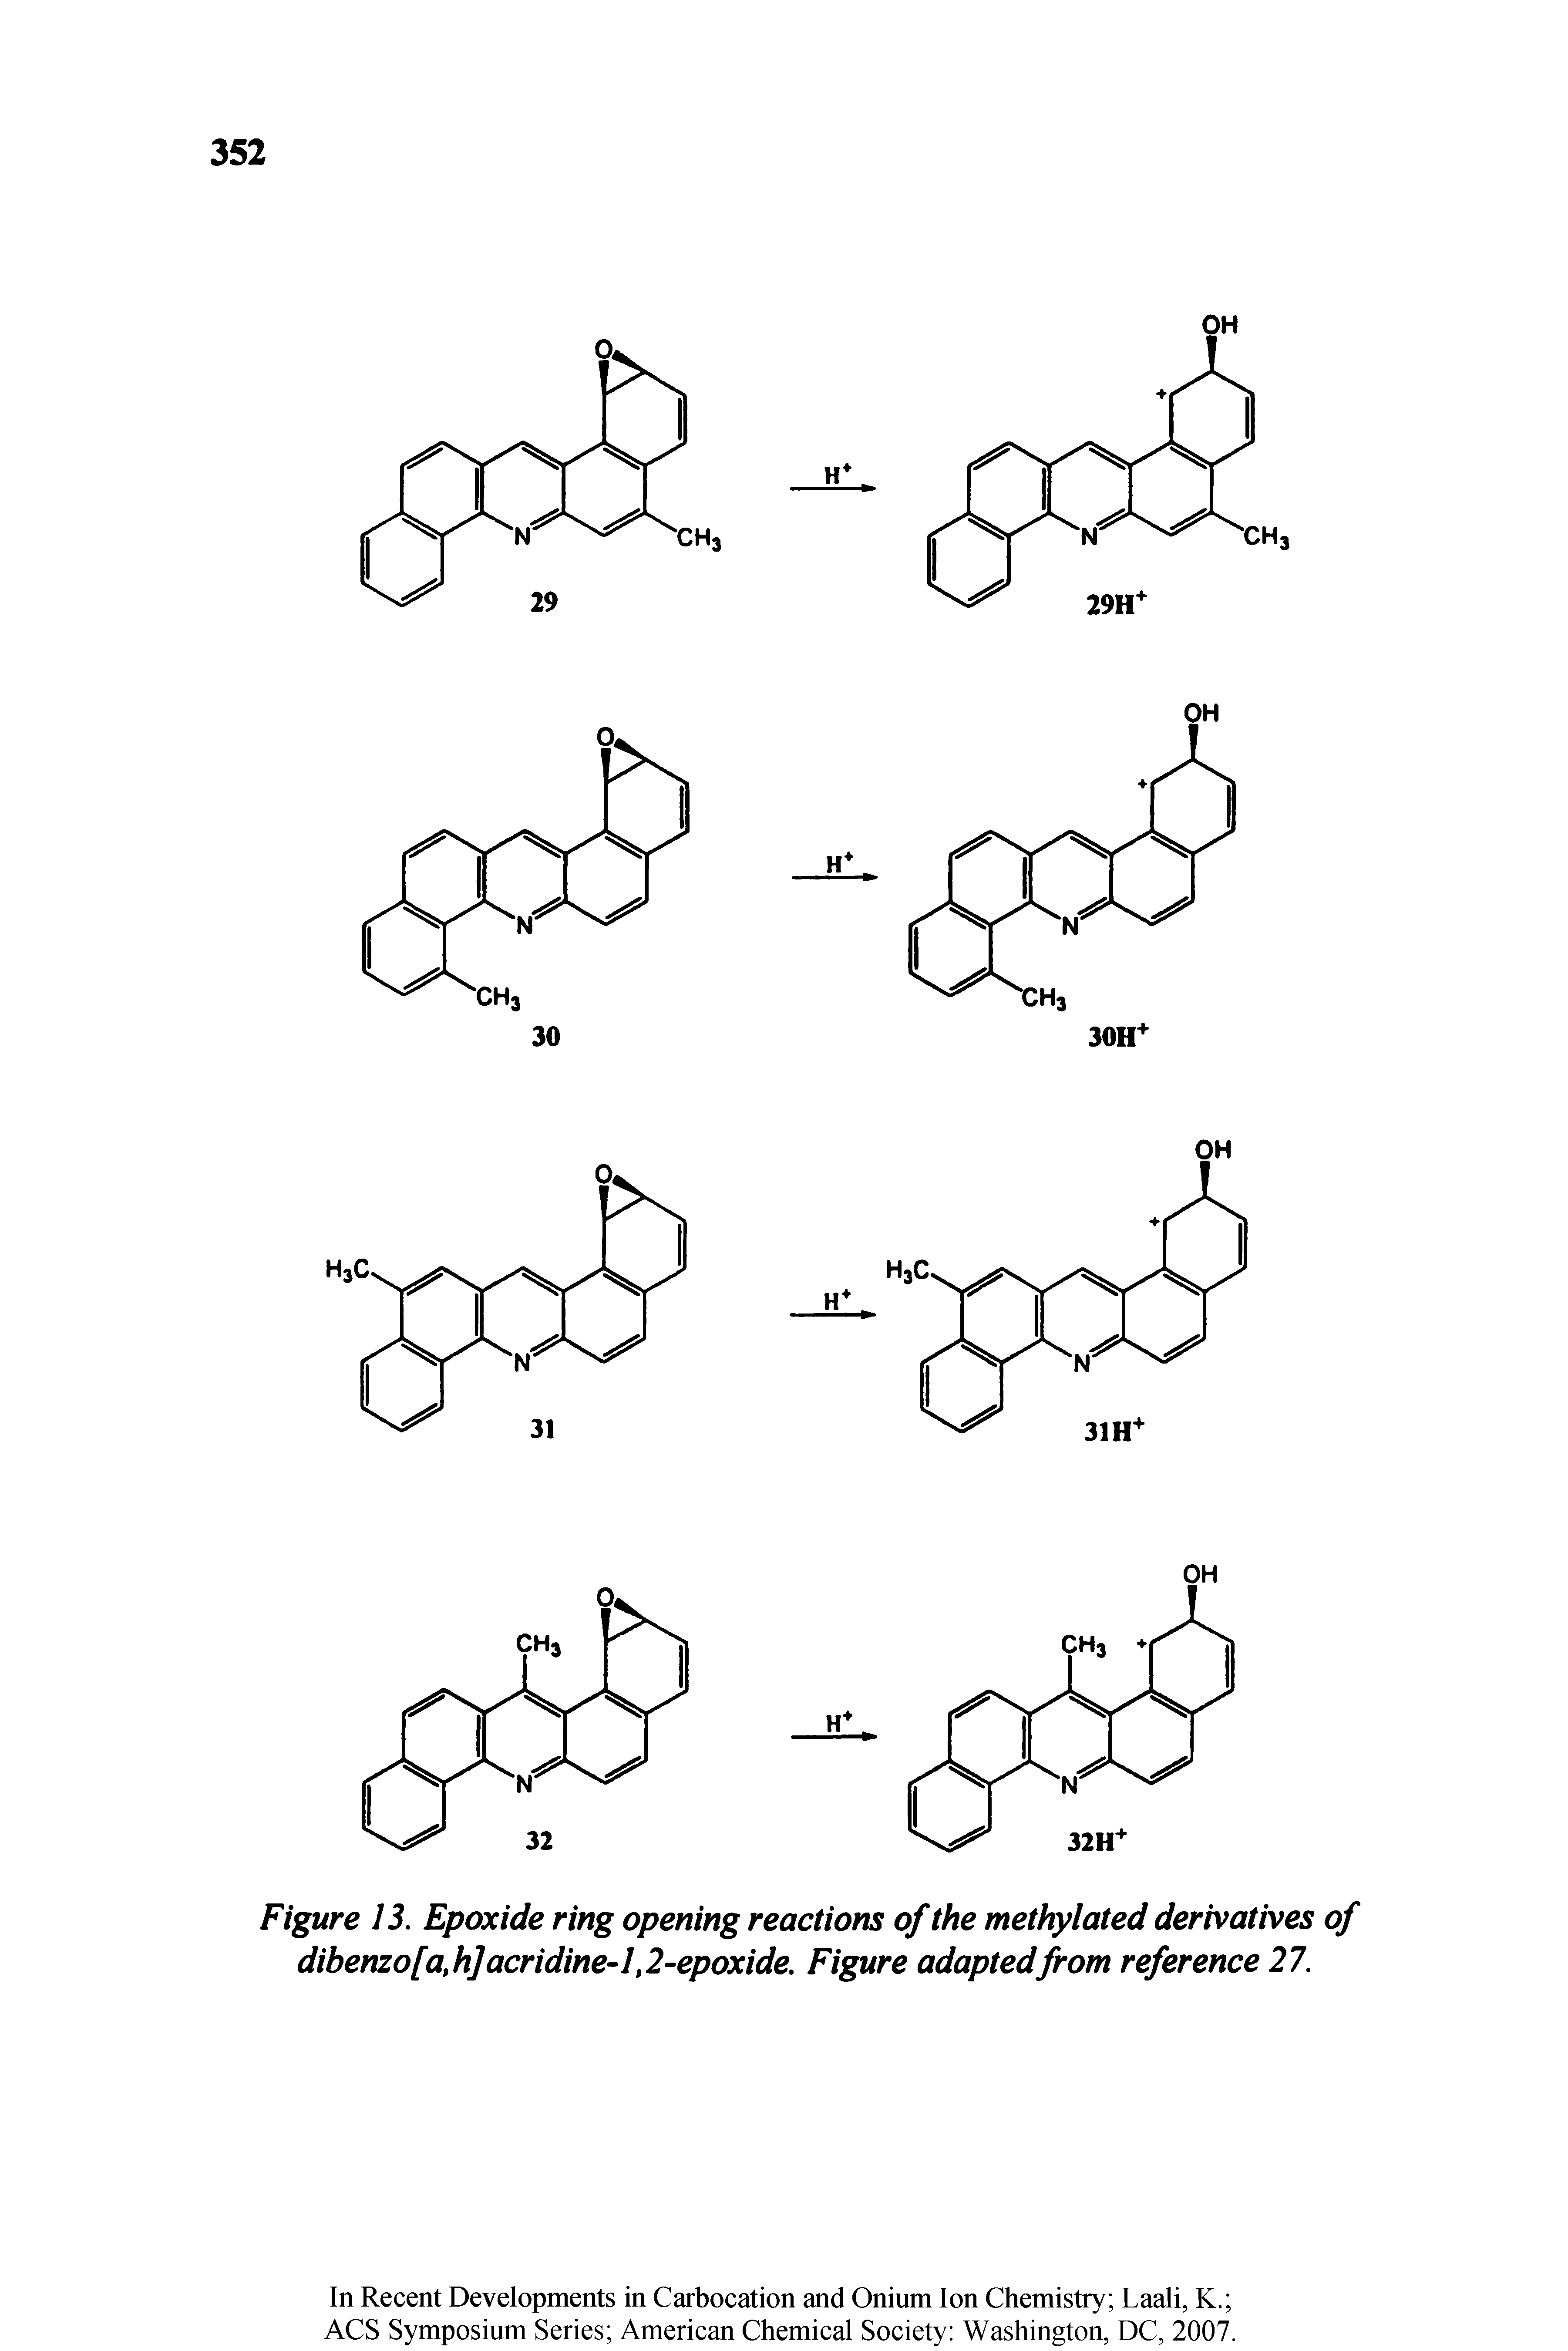 Figure 13. Epoxide ring opening reactions of the methylated derivatives of dibenzo [ath] acridine-1 t2-epoxide. Figure adapted from reference 27.